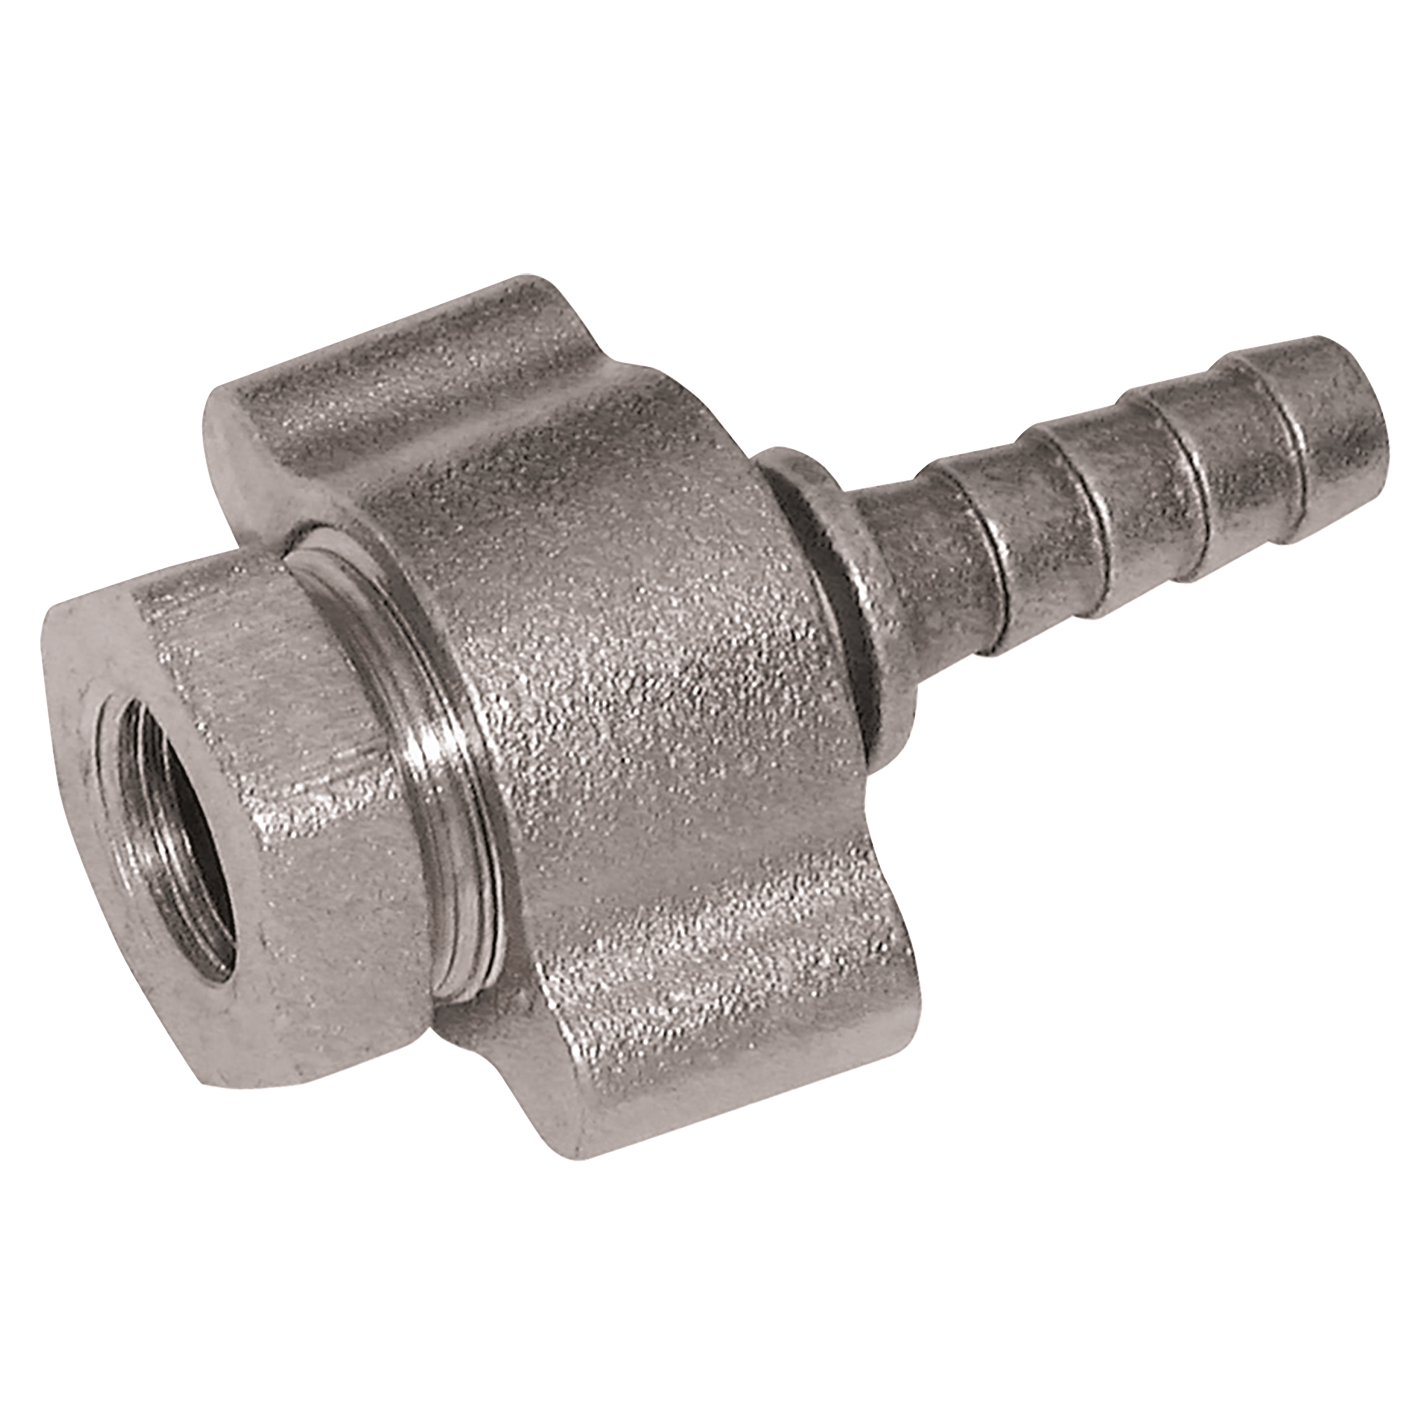 1/2" BSPP X 1/2" HT GROUND JOINT COUP